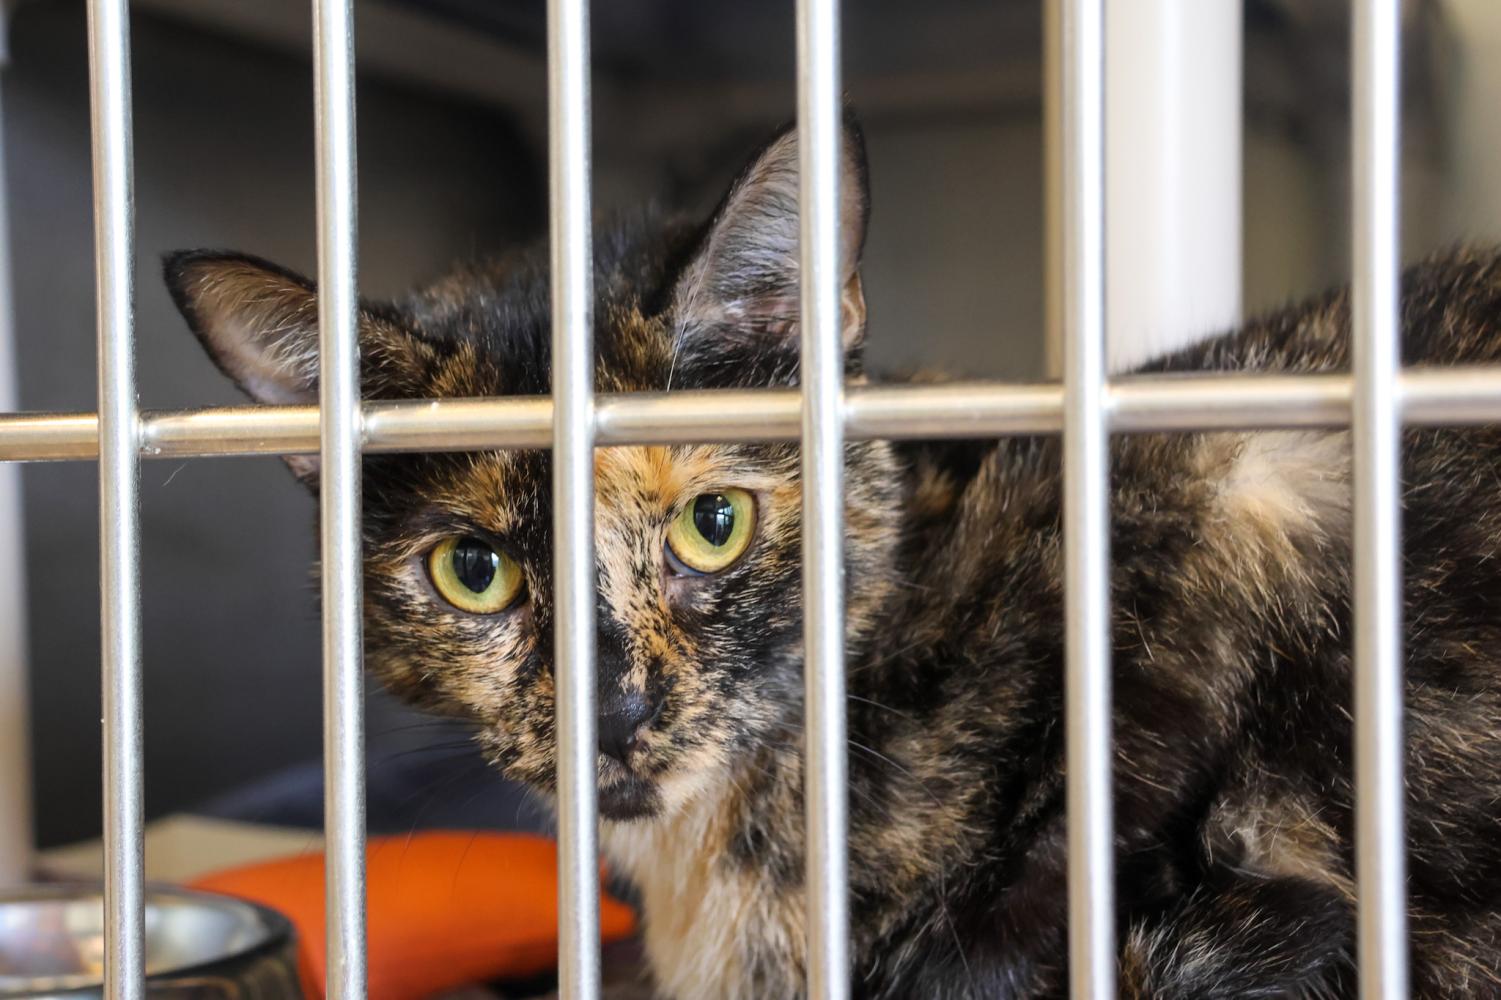 Looking Through the Bars: A cat located at the Kentucky Humane Societys main campus stares at the camera through the bars of its cage.